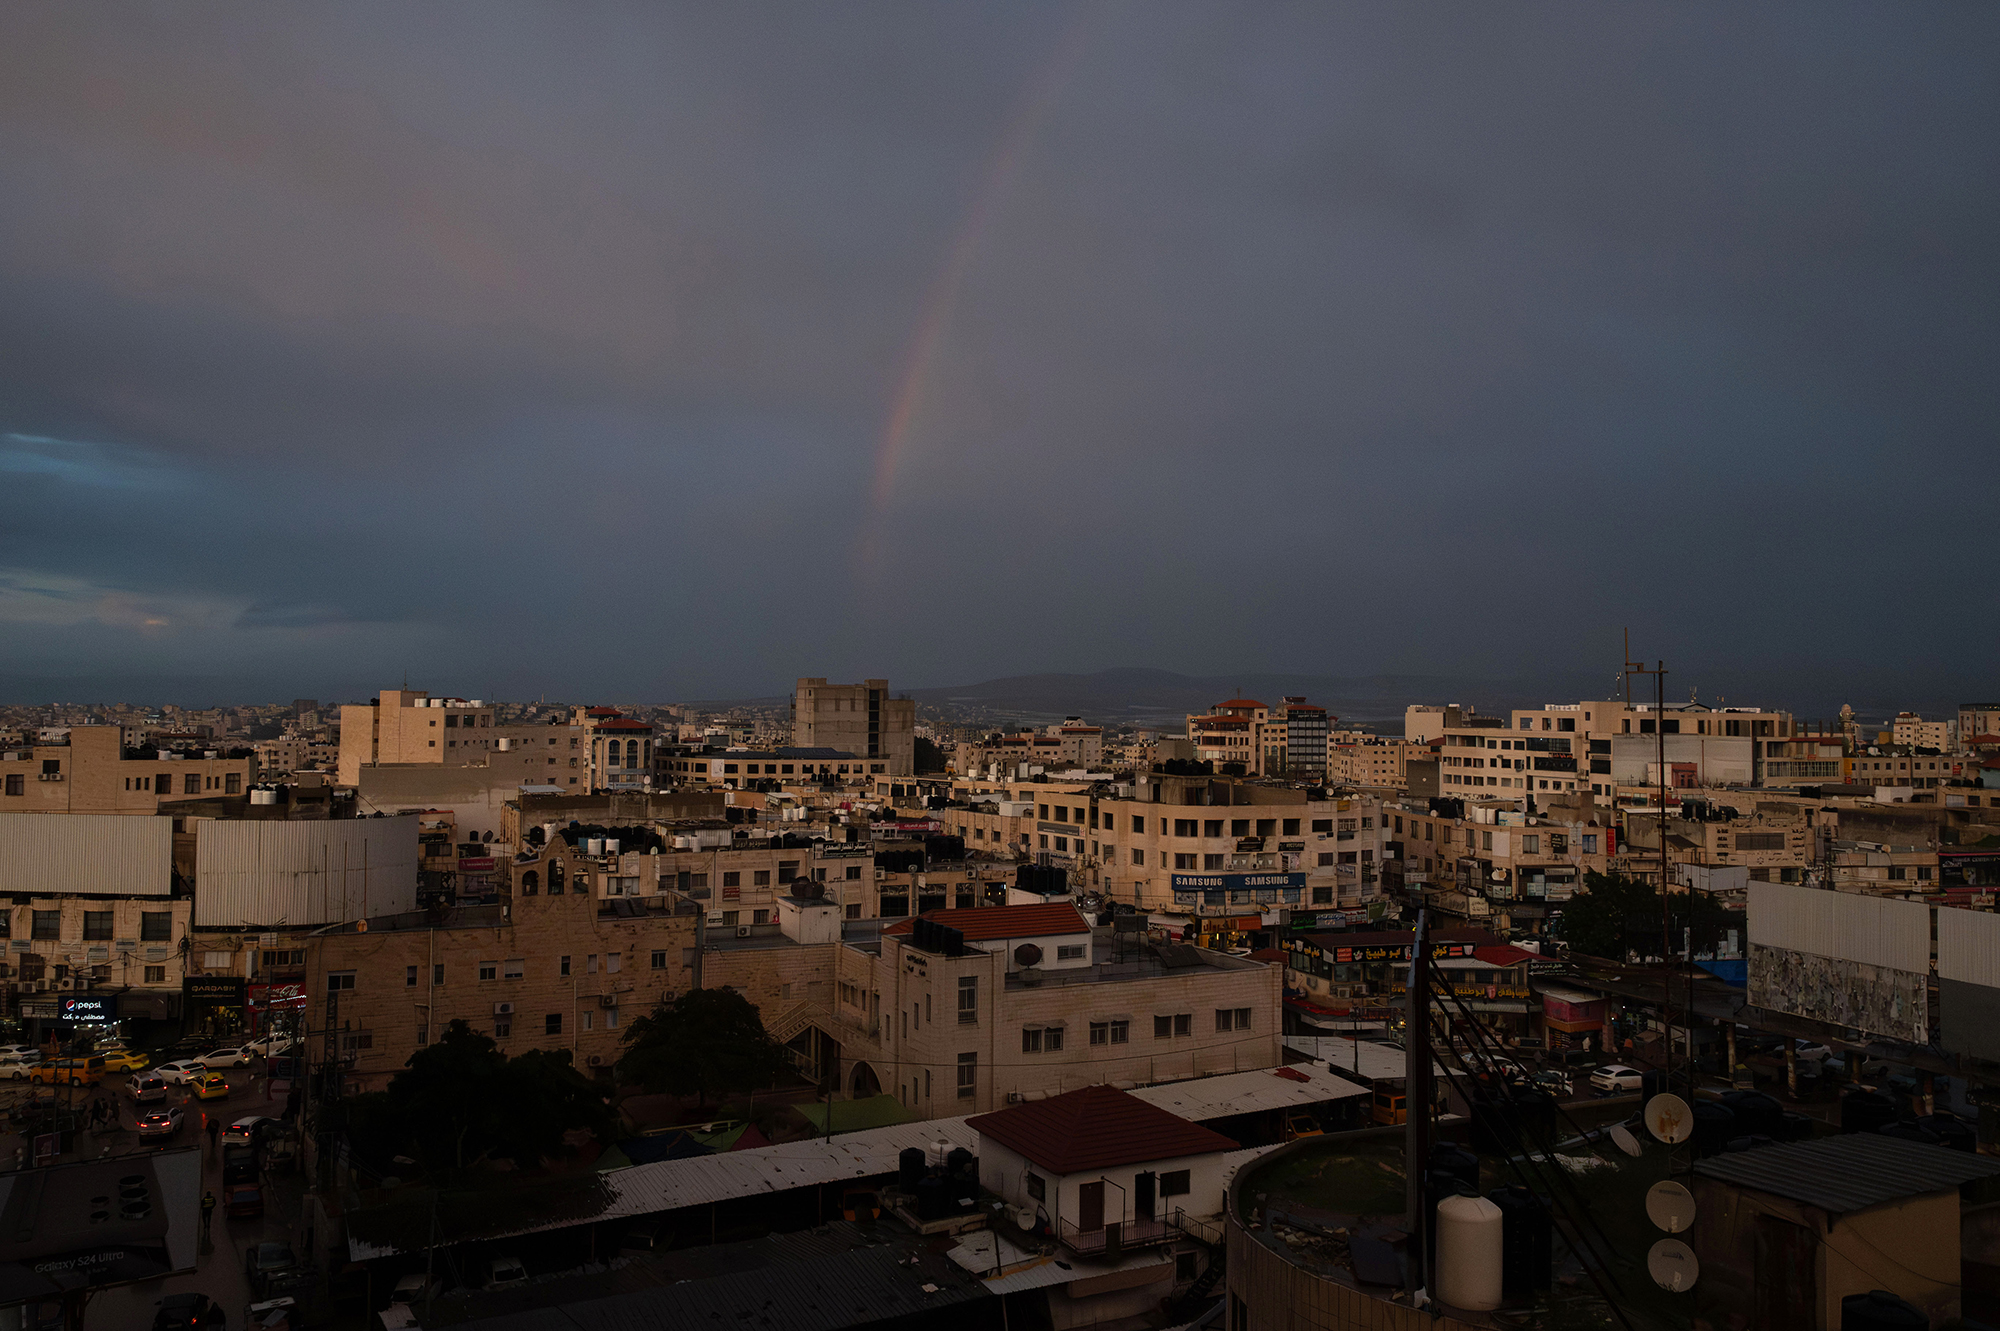 Rainbow over landscape of a city.